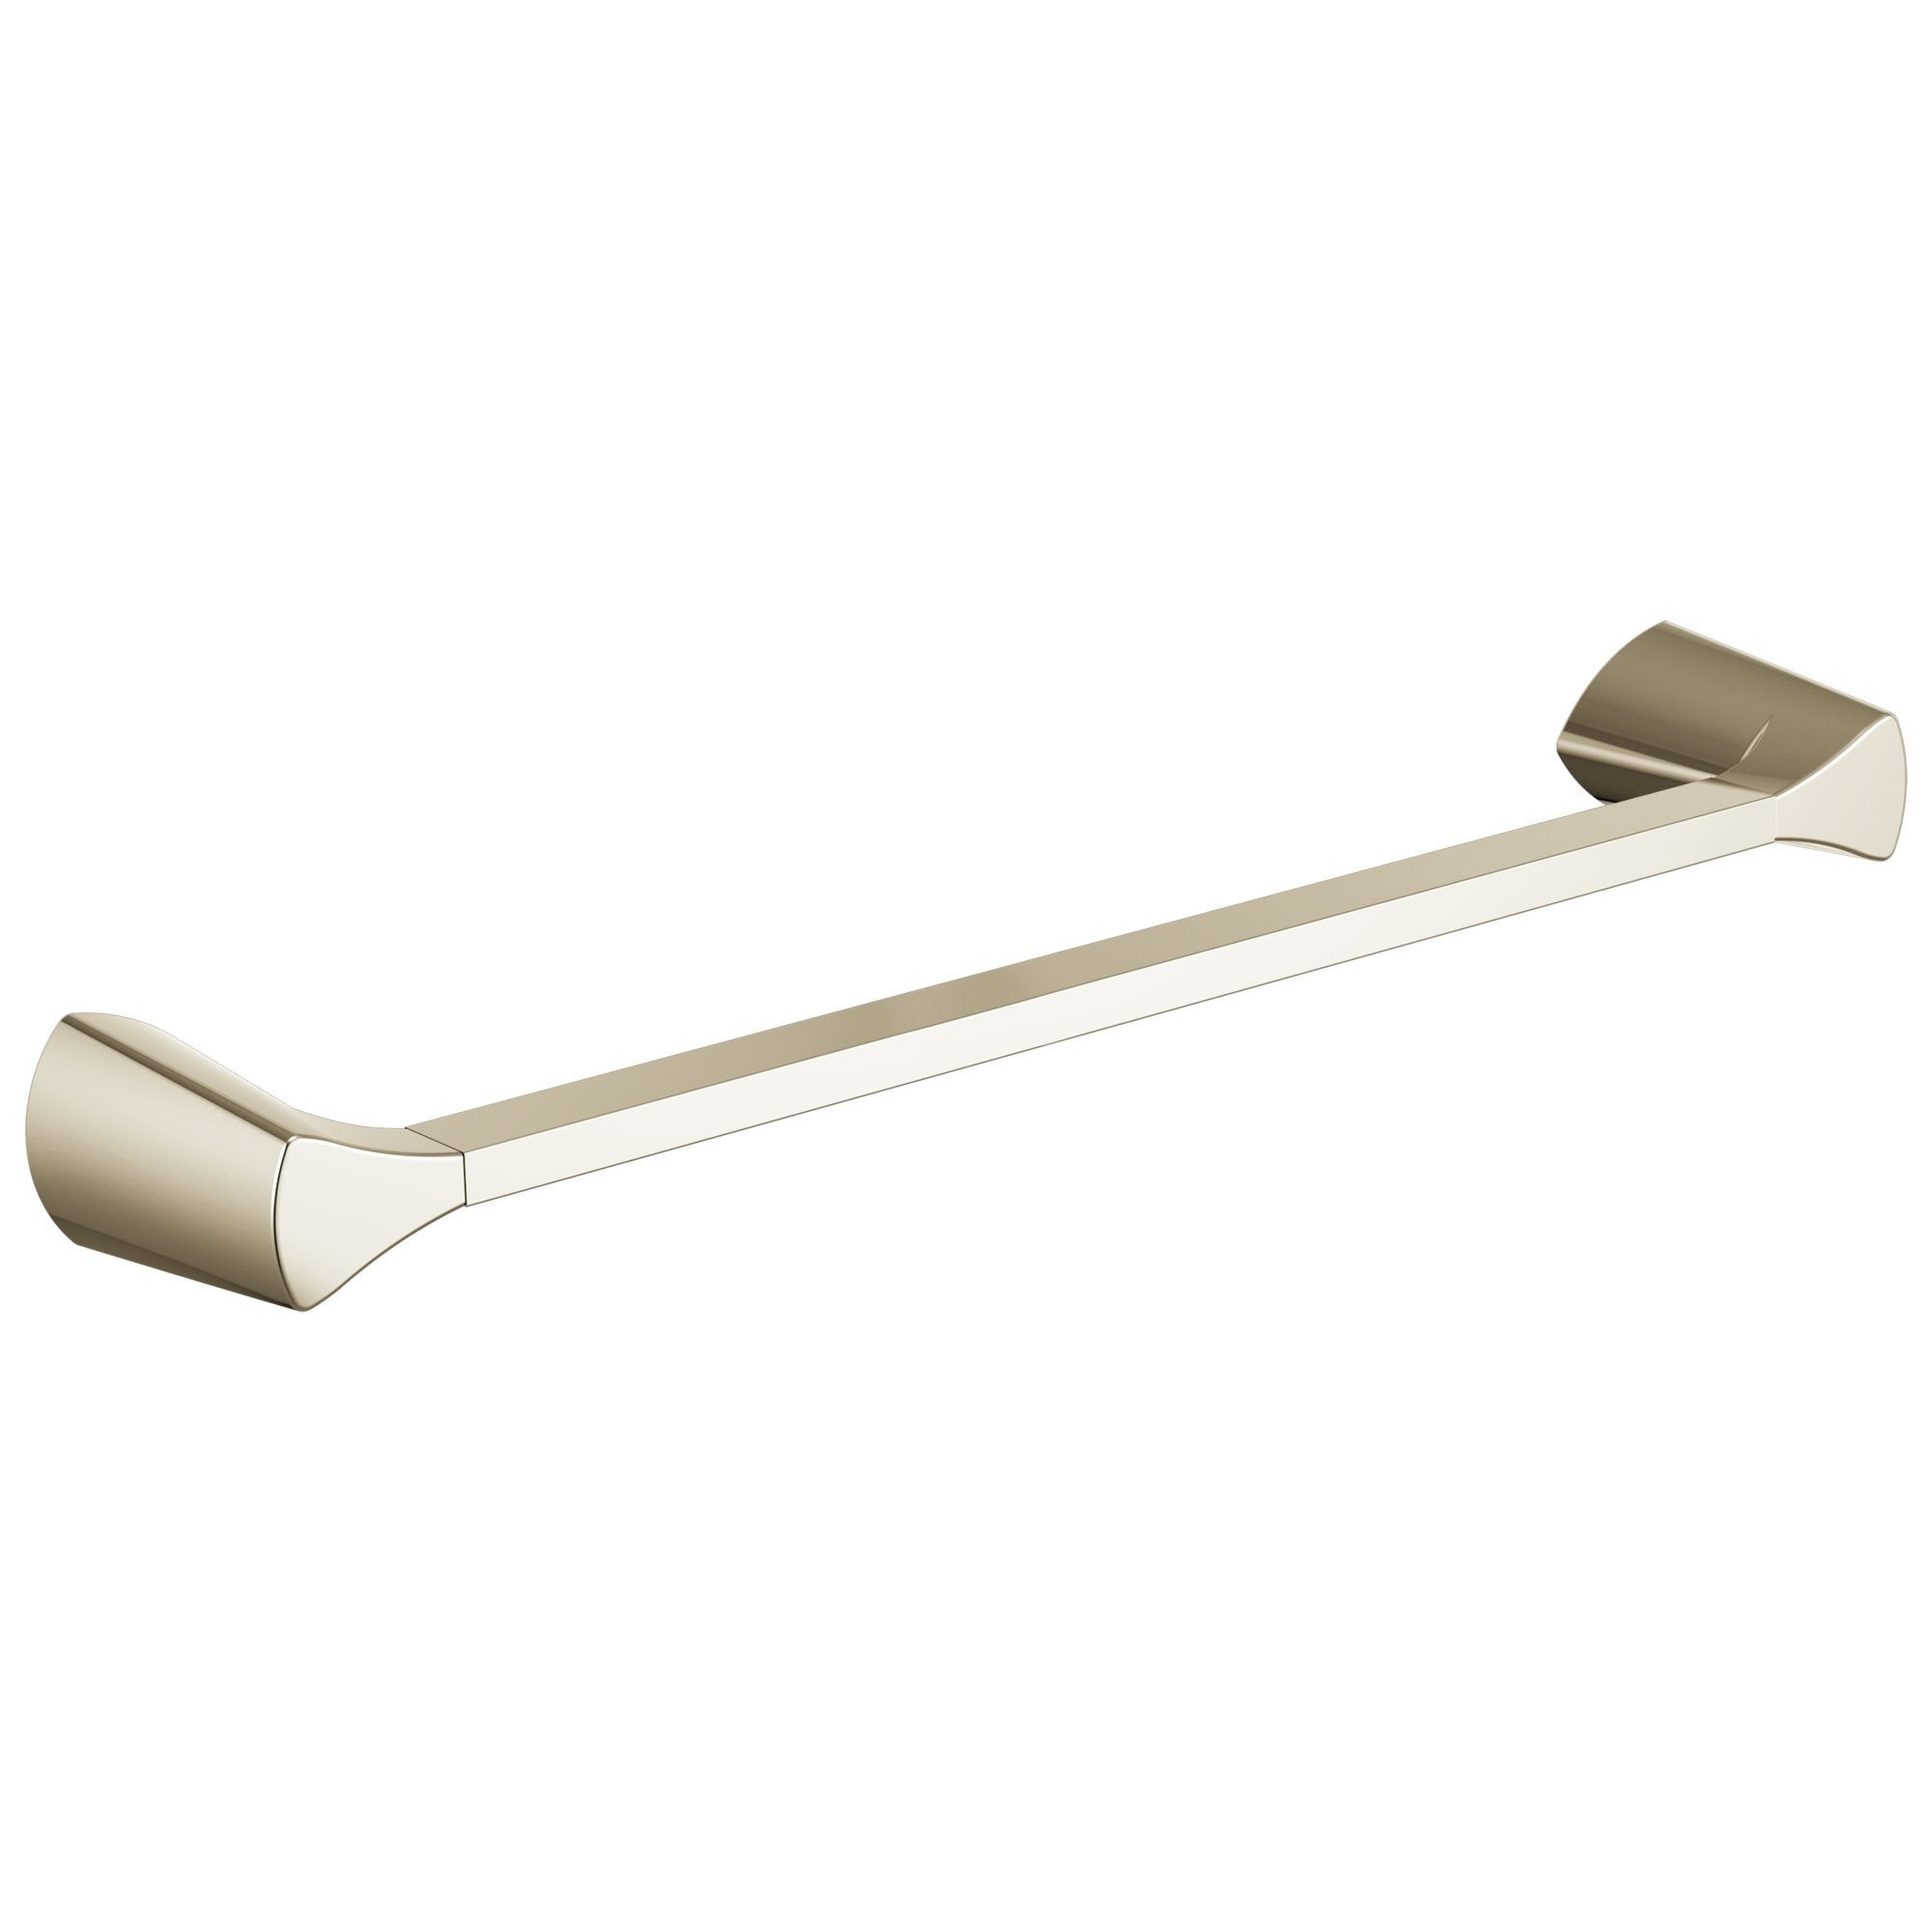 Delta Zura Collection Polished Nickel Finish Modern 18" Wall Mounted Single Towel Bar D77418PN